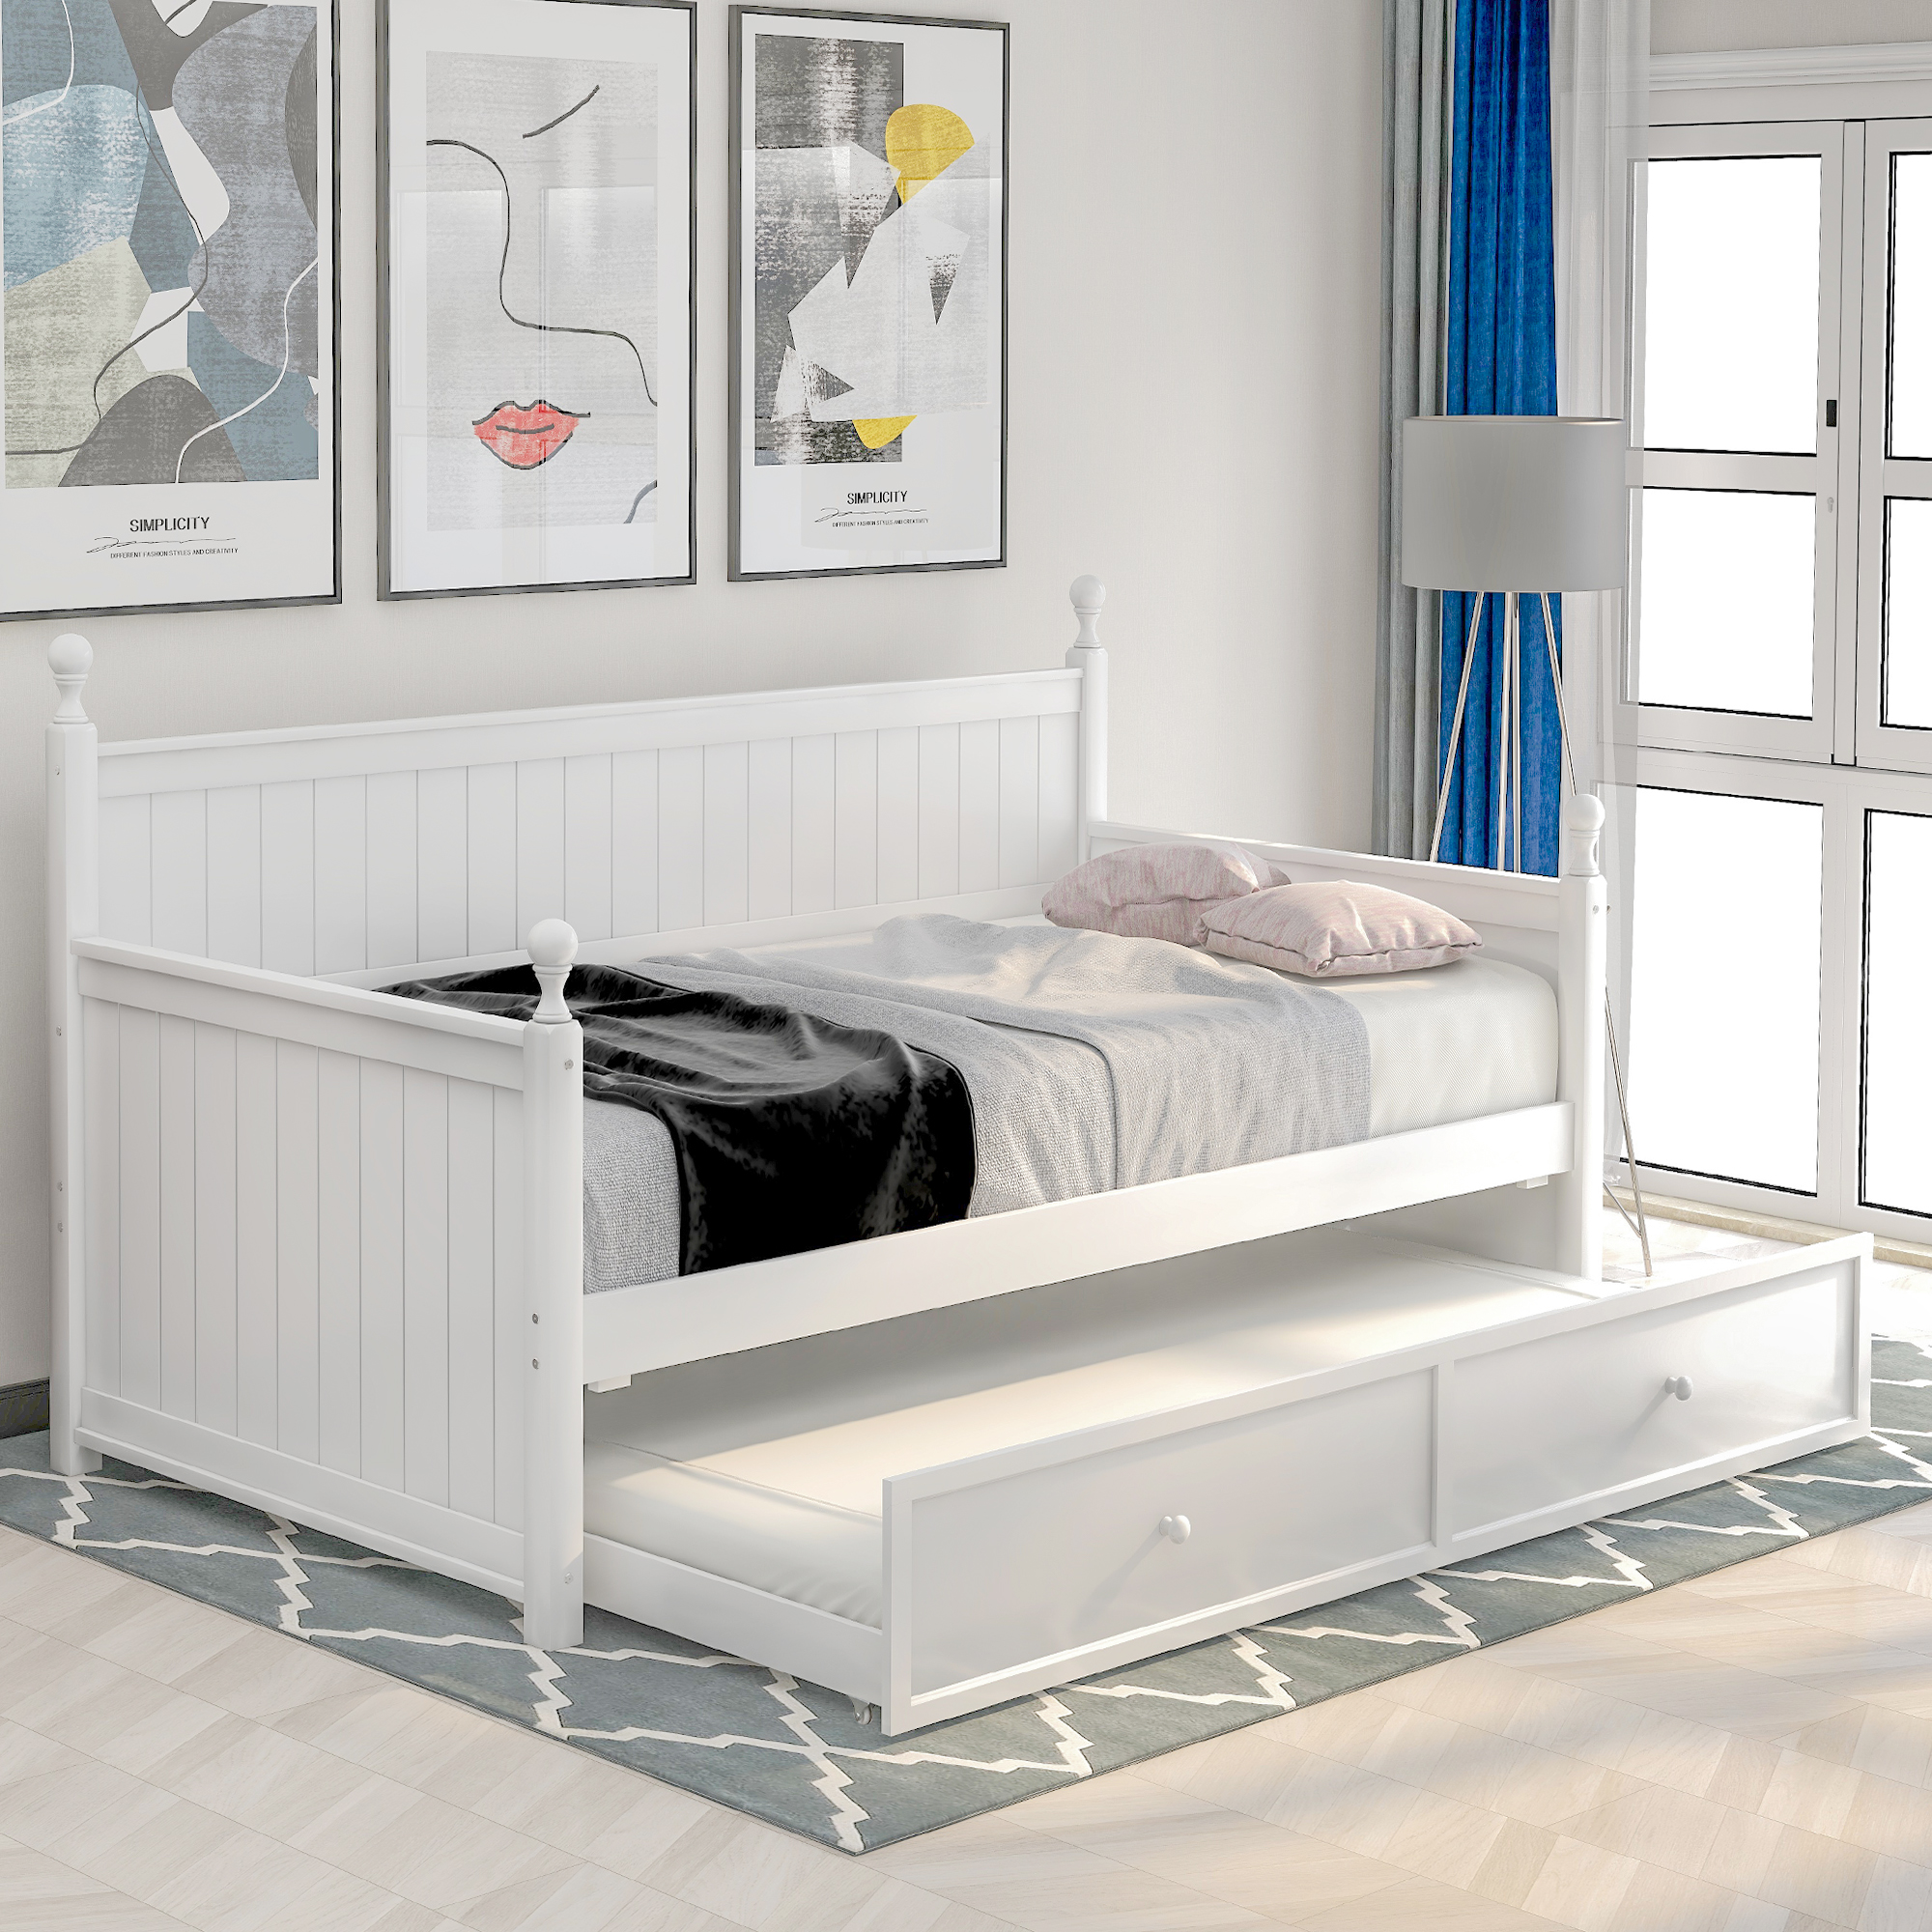 Kepooman Twin Size Modern Wooden Daybed Frame with Twin Size Trundle & Headboard for Bedroom Dorm, 80.5" x 42.1" x 45.41", White - image 2 of 16